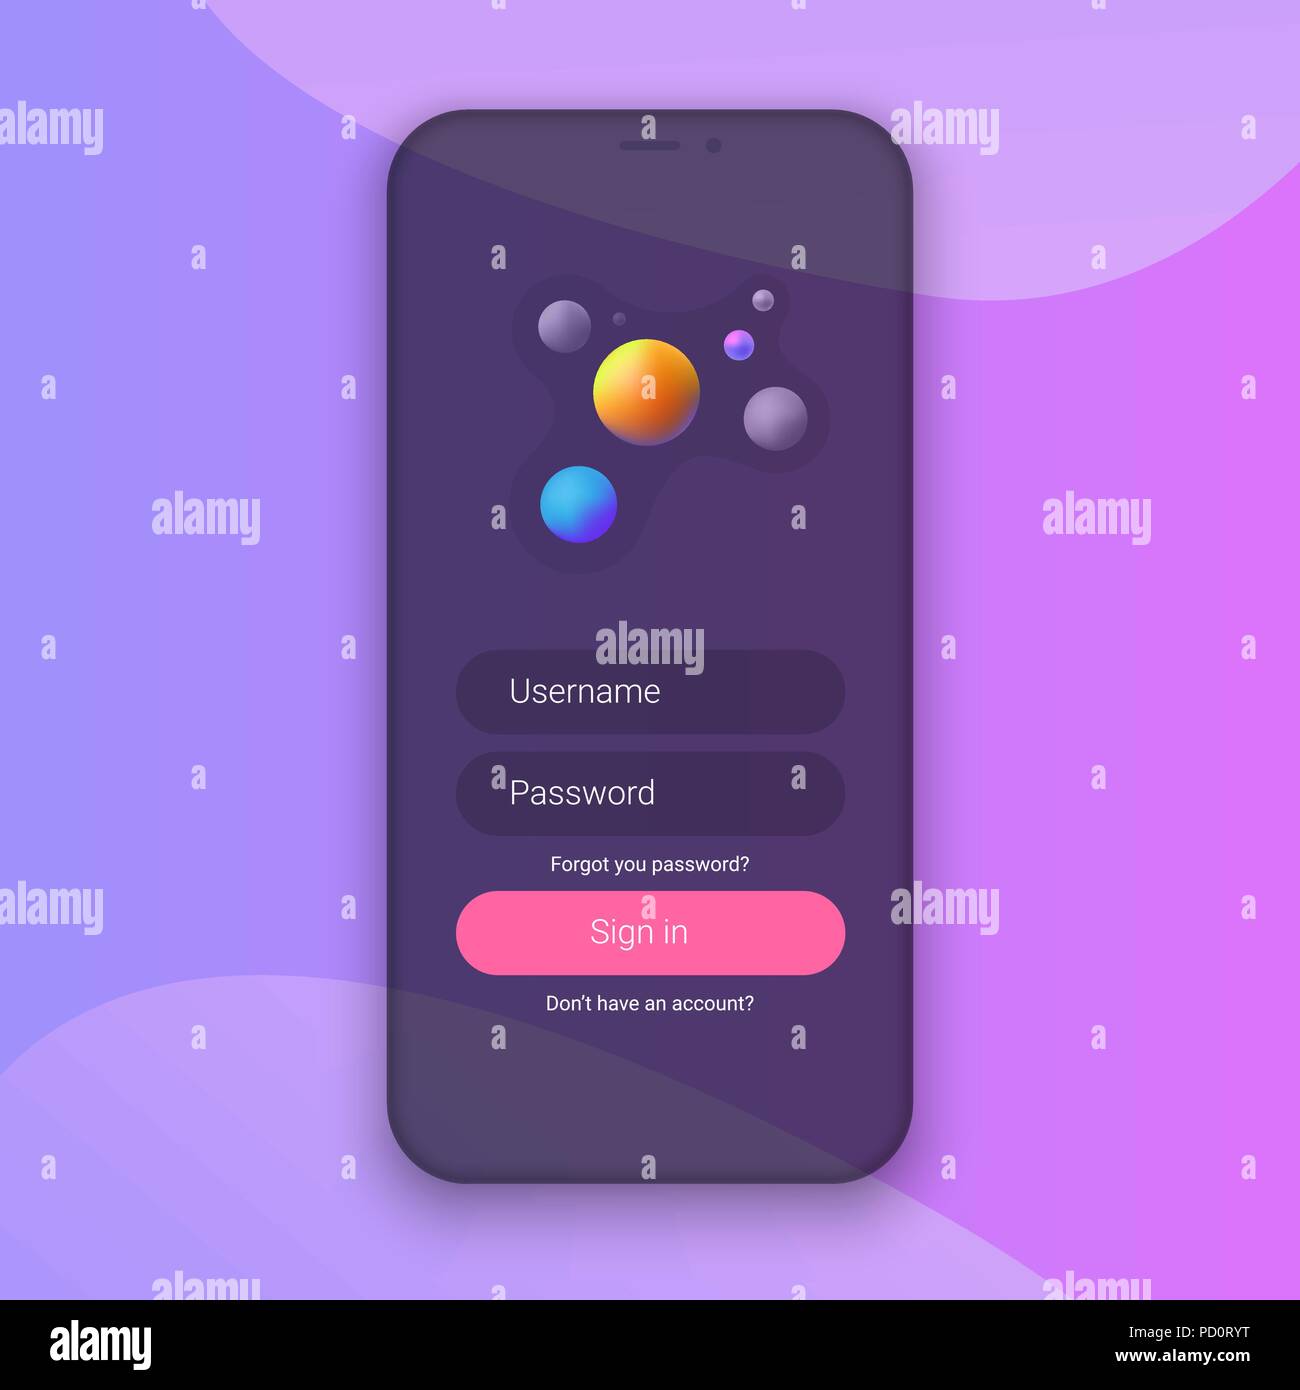 Sign In Screen. Clean Mobile UI Design Concept. Login Application with Password Form Window. Trendy Holographic Gradients Shapes. Vector EPS 10 Stock Vector